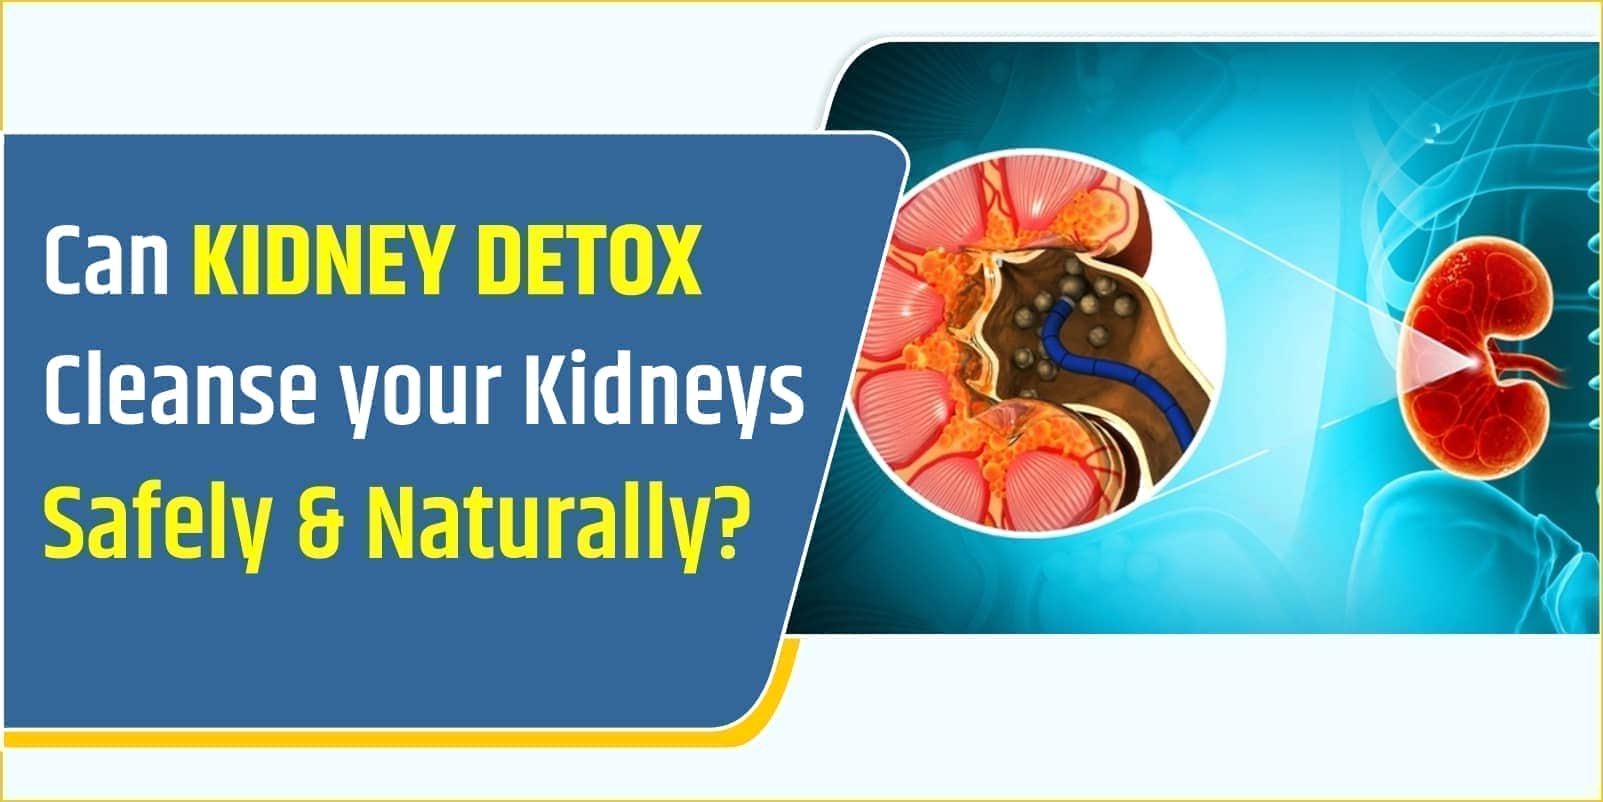 Can Kidney Detox Cleanse your Kidneys Safely & Naturally?